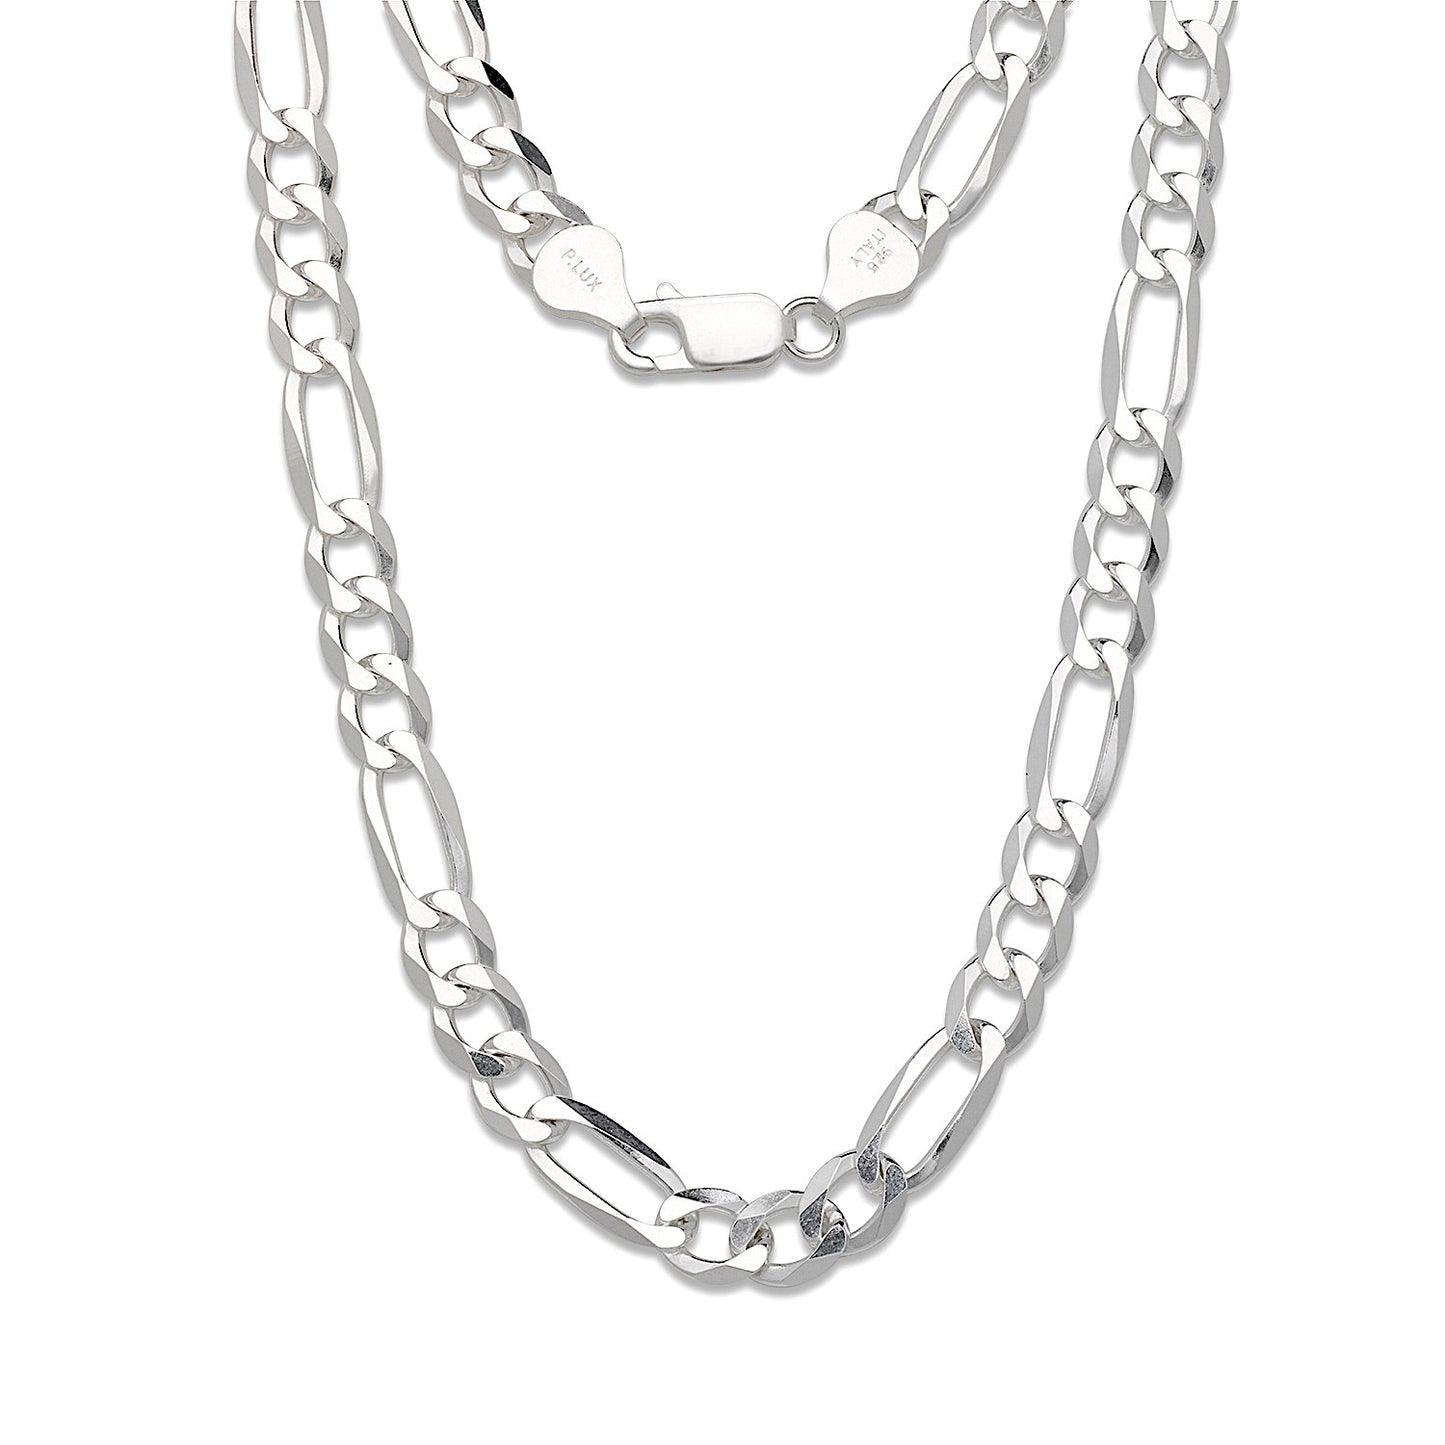 Better Jewelry 7 mm Figaro Chain .925 Sterling Silver